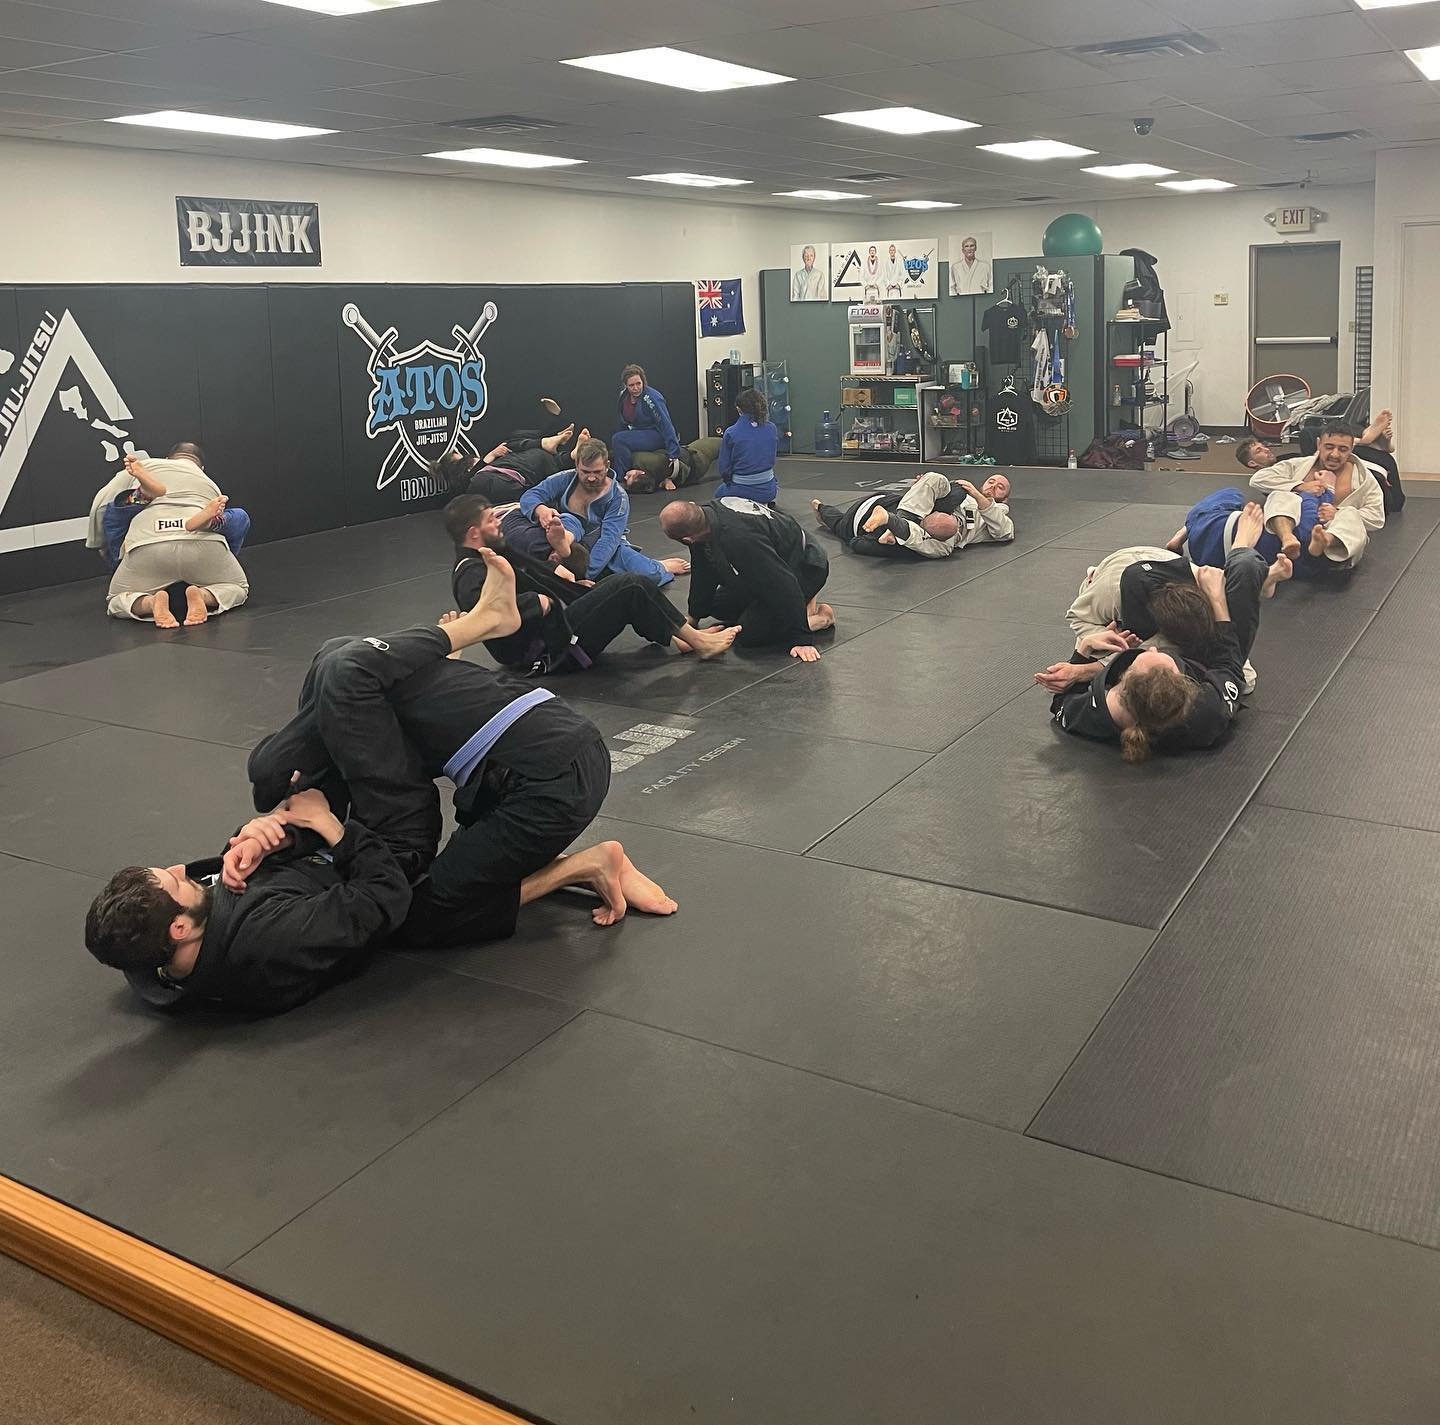 &ldquo;Consistency is what transforms average into excellent!&rdquo; Jiu-Jitsu is a grind either physically or mentally then eventually, inevitably both. Come try your first week free @islandjiujitsumichigan 

Morning, Evening, Gi, No Gi, Kids, Adult